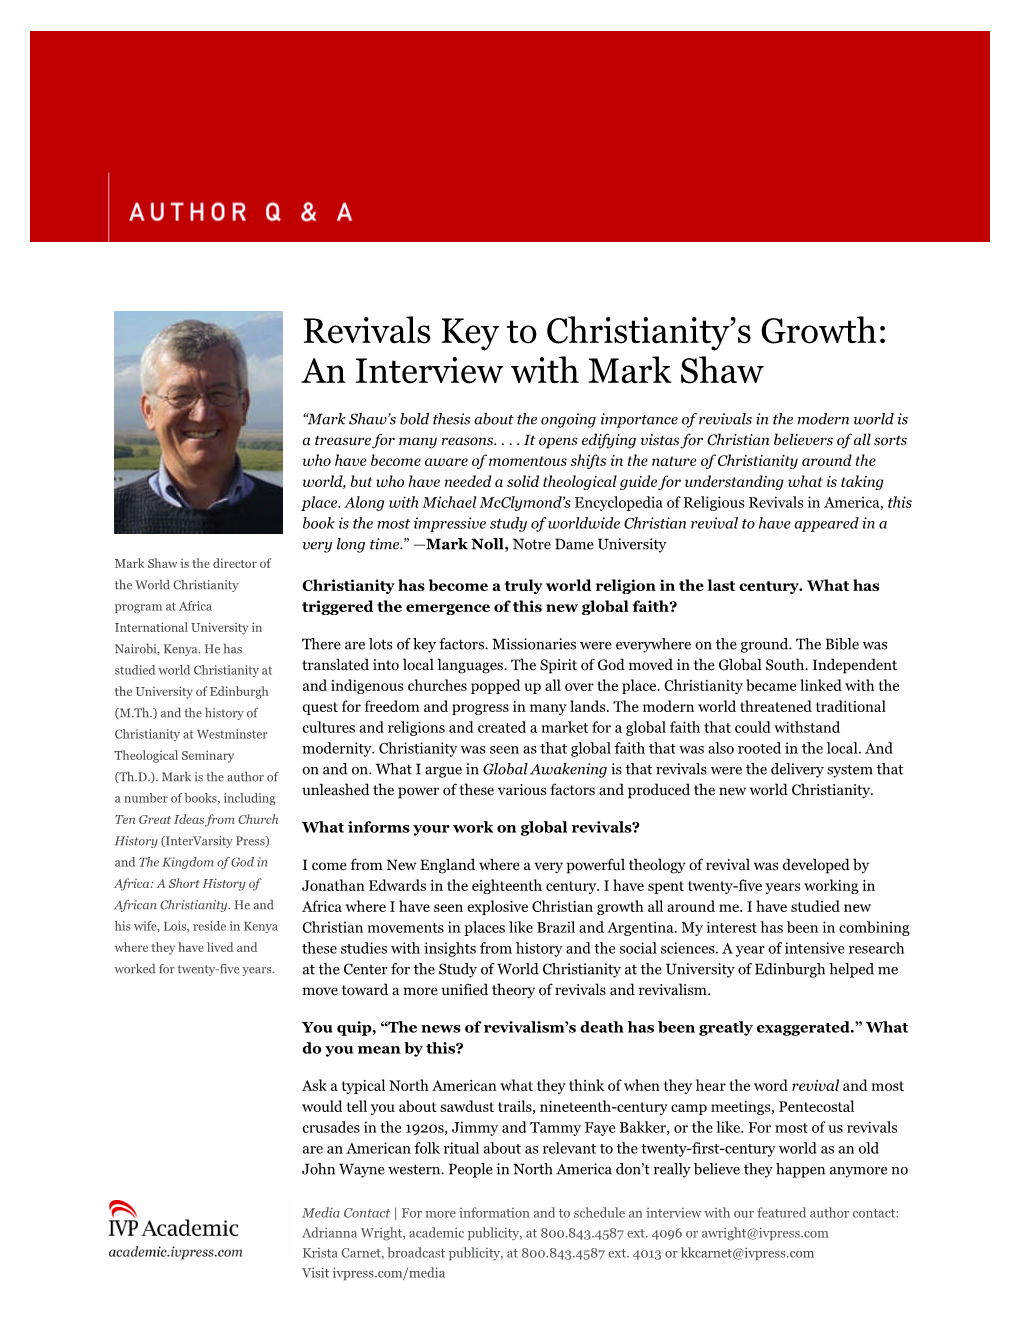 Revivals Key to Christianity's Growth: an Interview with Mark Shaw